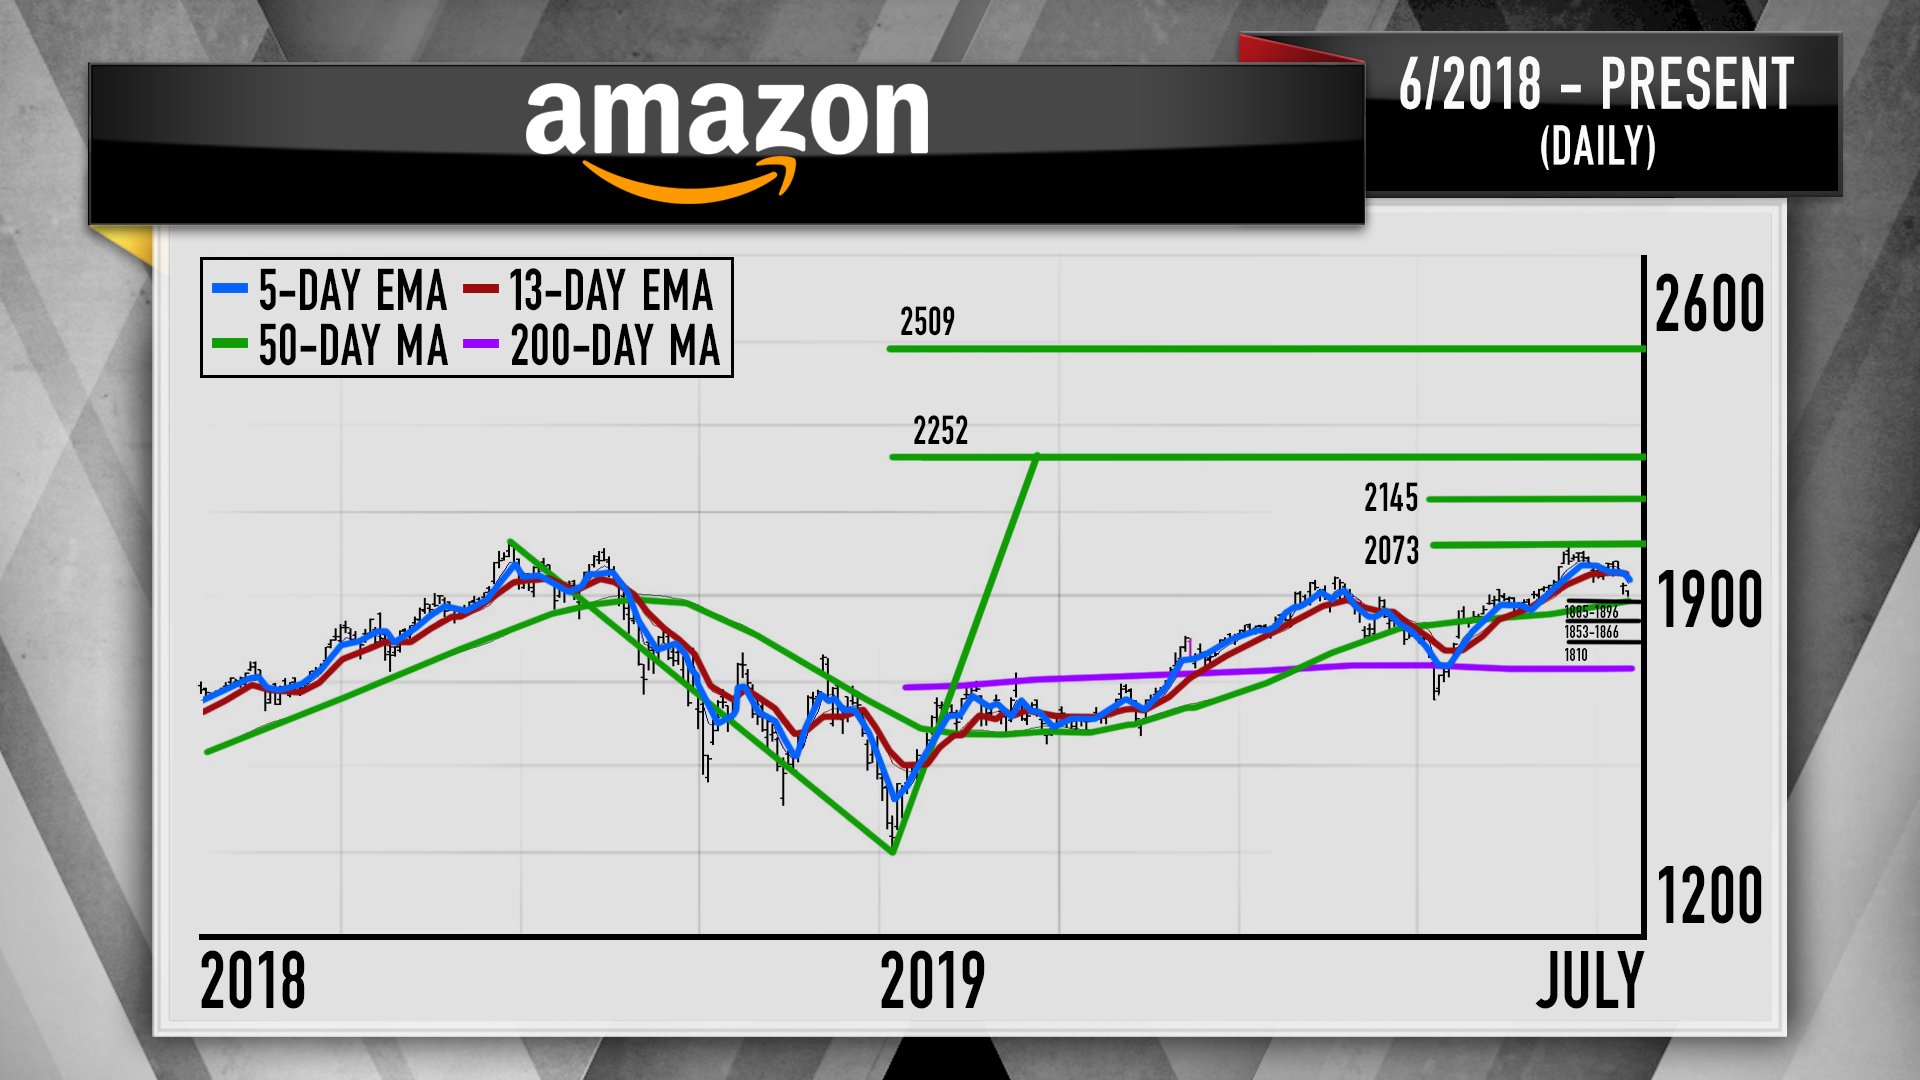 The charts show Amazon's stock can break through record highs: Cramer